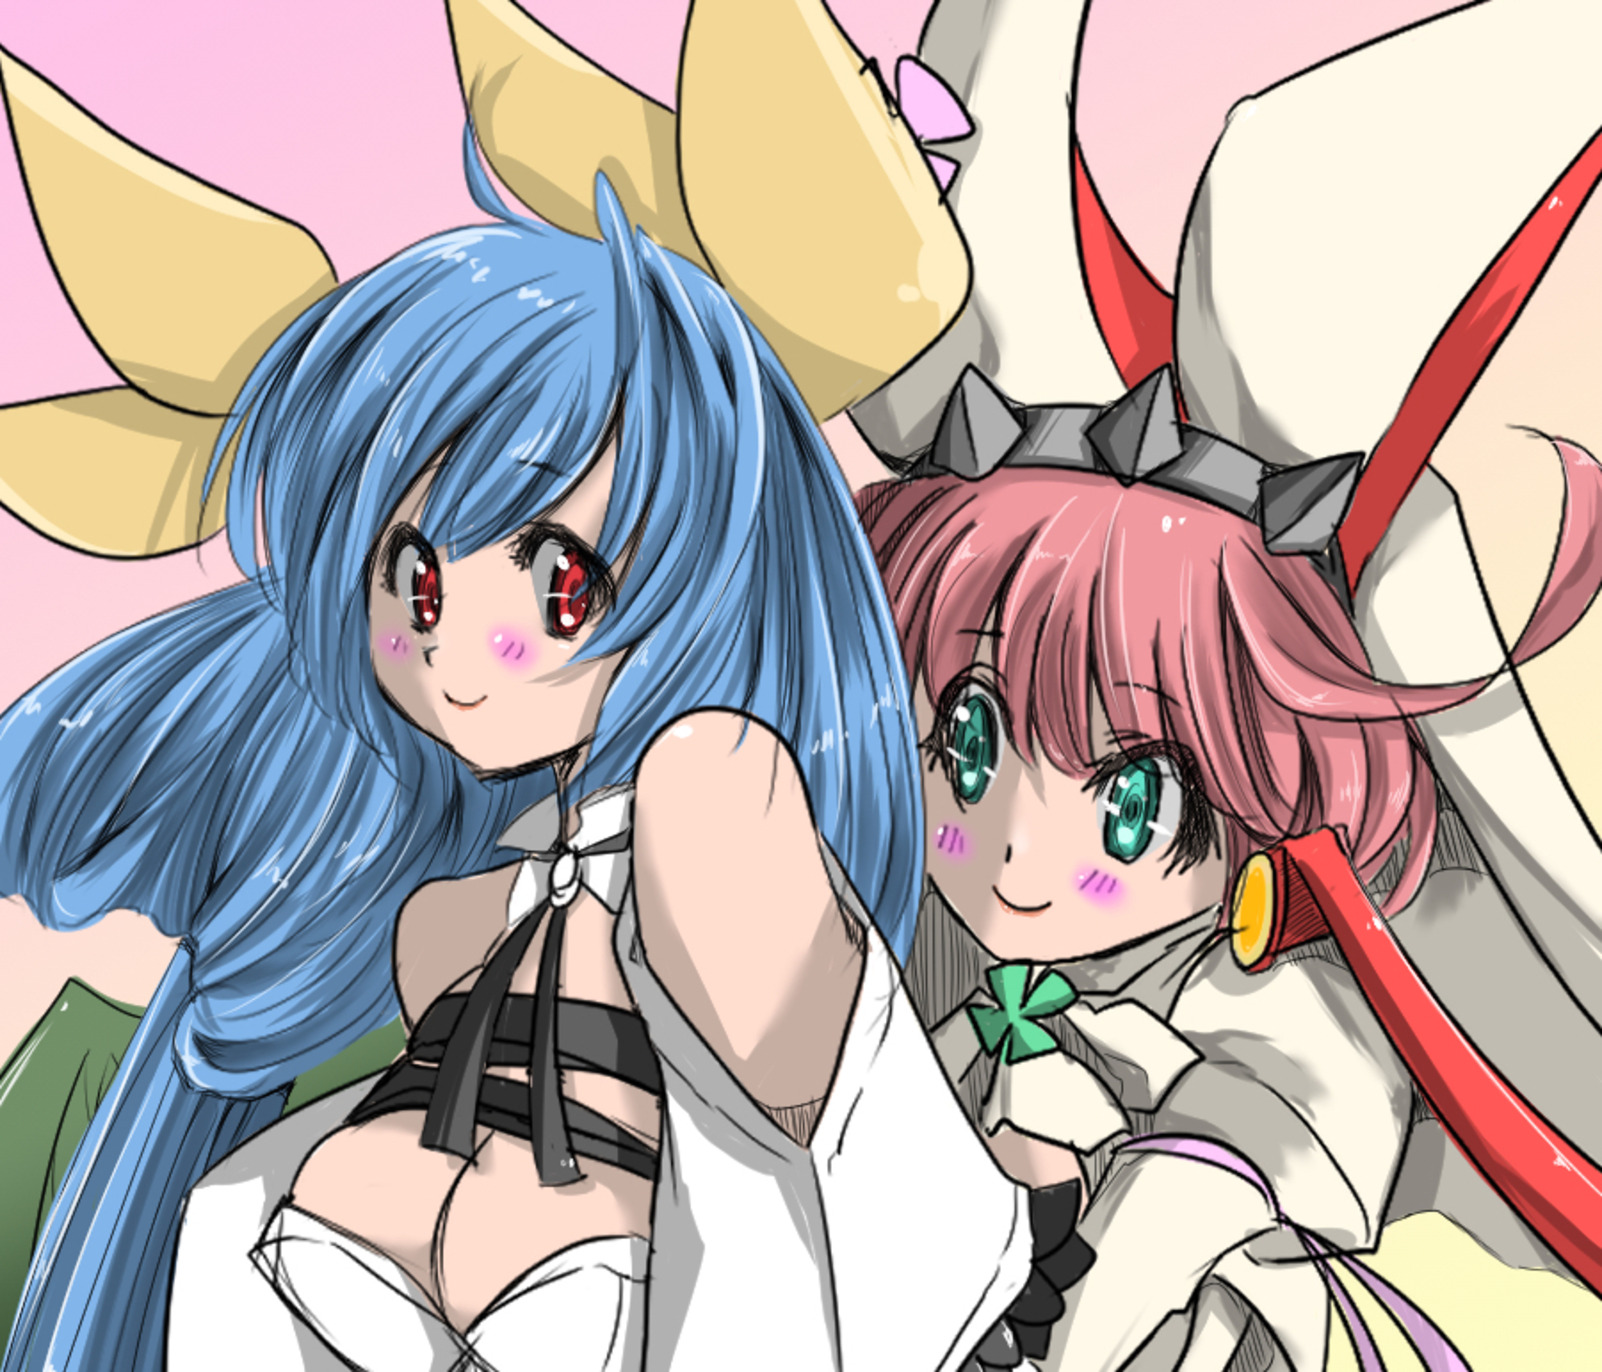 Anime 1602x1372 Guilty Gear Elphelt Valentine anime games anime girl with wings yuri Guilty Gear Xrd Dizzy (Guilty Gear) Testament (guilty gear)